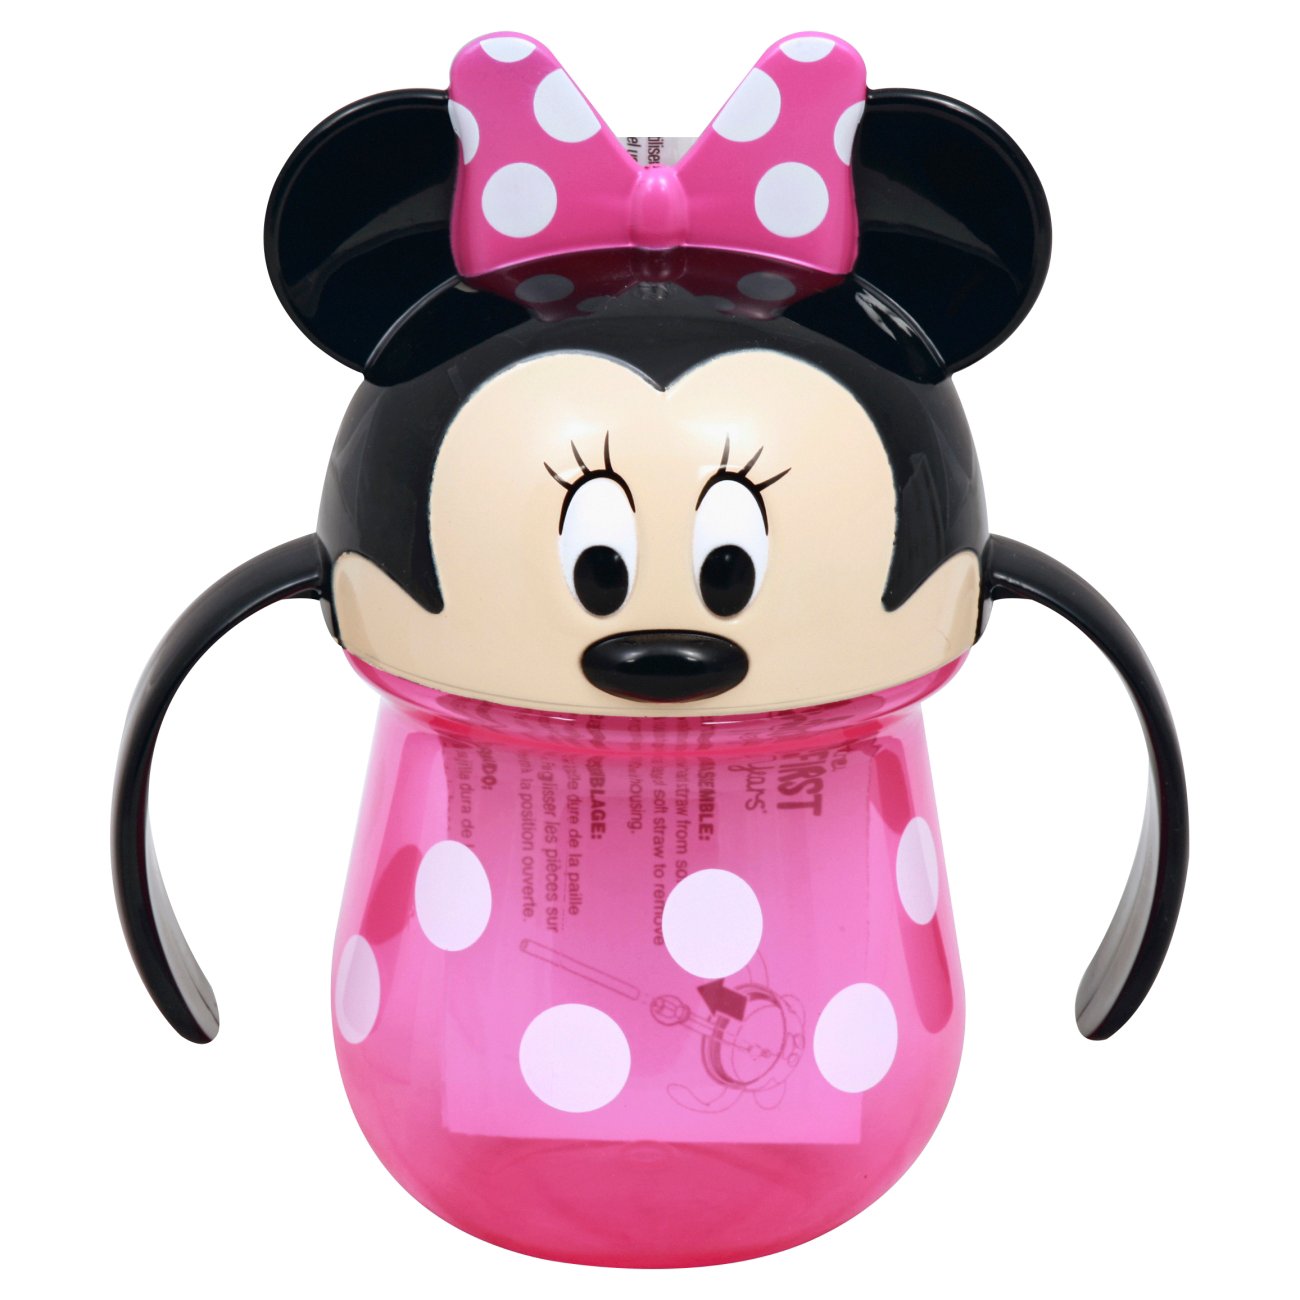 Disney Baby Mickey & Minnie Mouse Straw Cup with handles 10 oz trainer cup  12+m